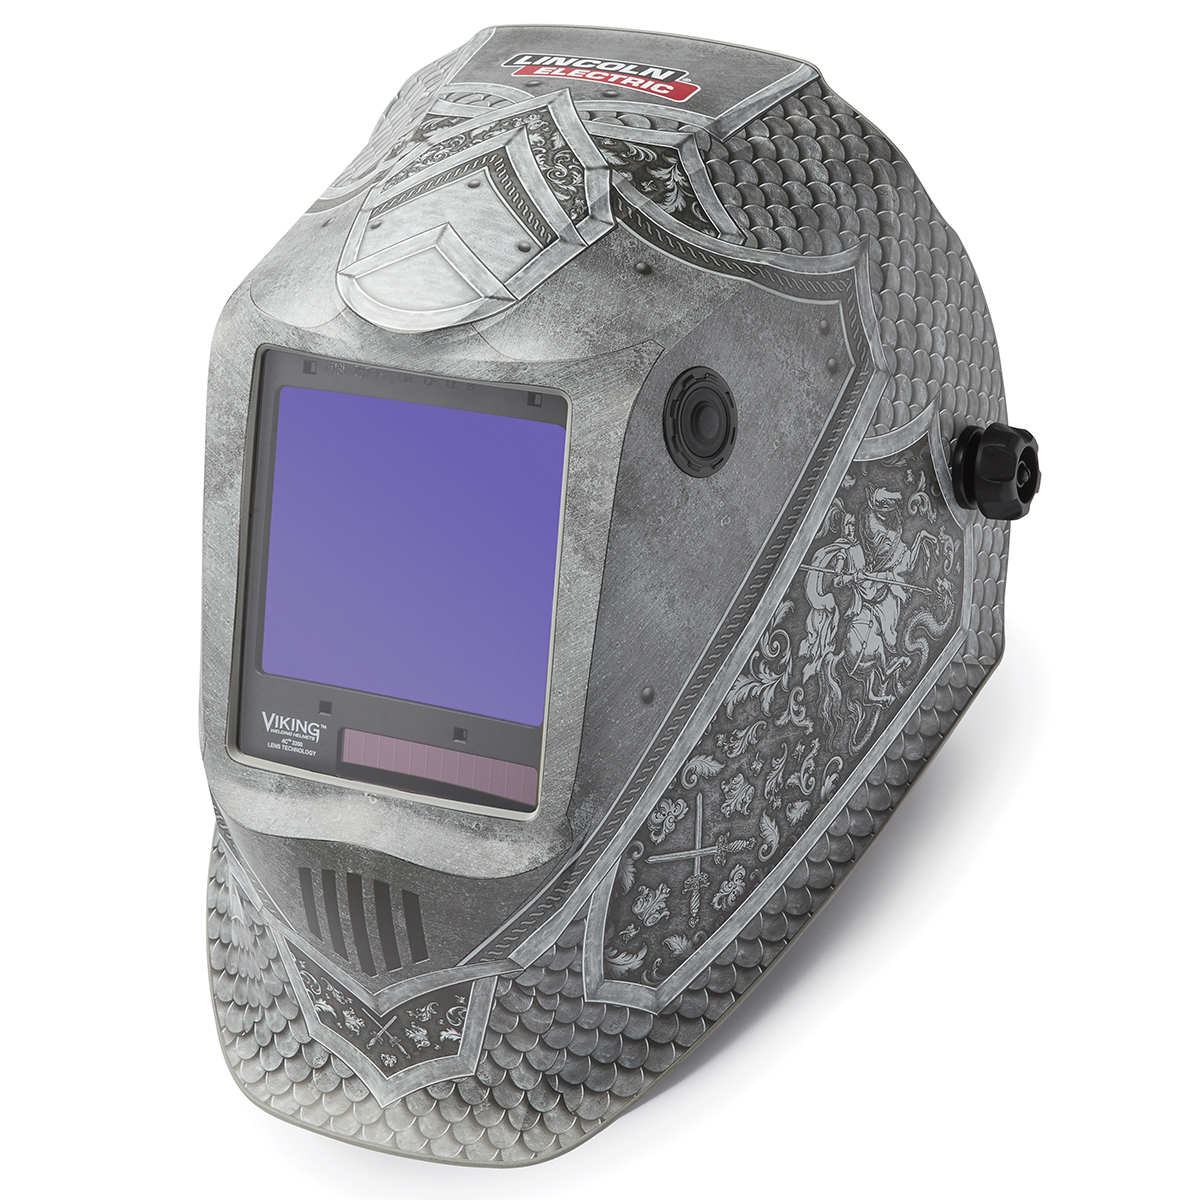 Lincoln Electric® VIKING® 3350 Grey/Black Welding Helmet With Variable Shades 5 - 13 Auto Darkening Lens, 4C® Lens Technology An